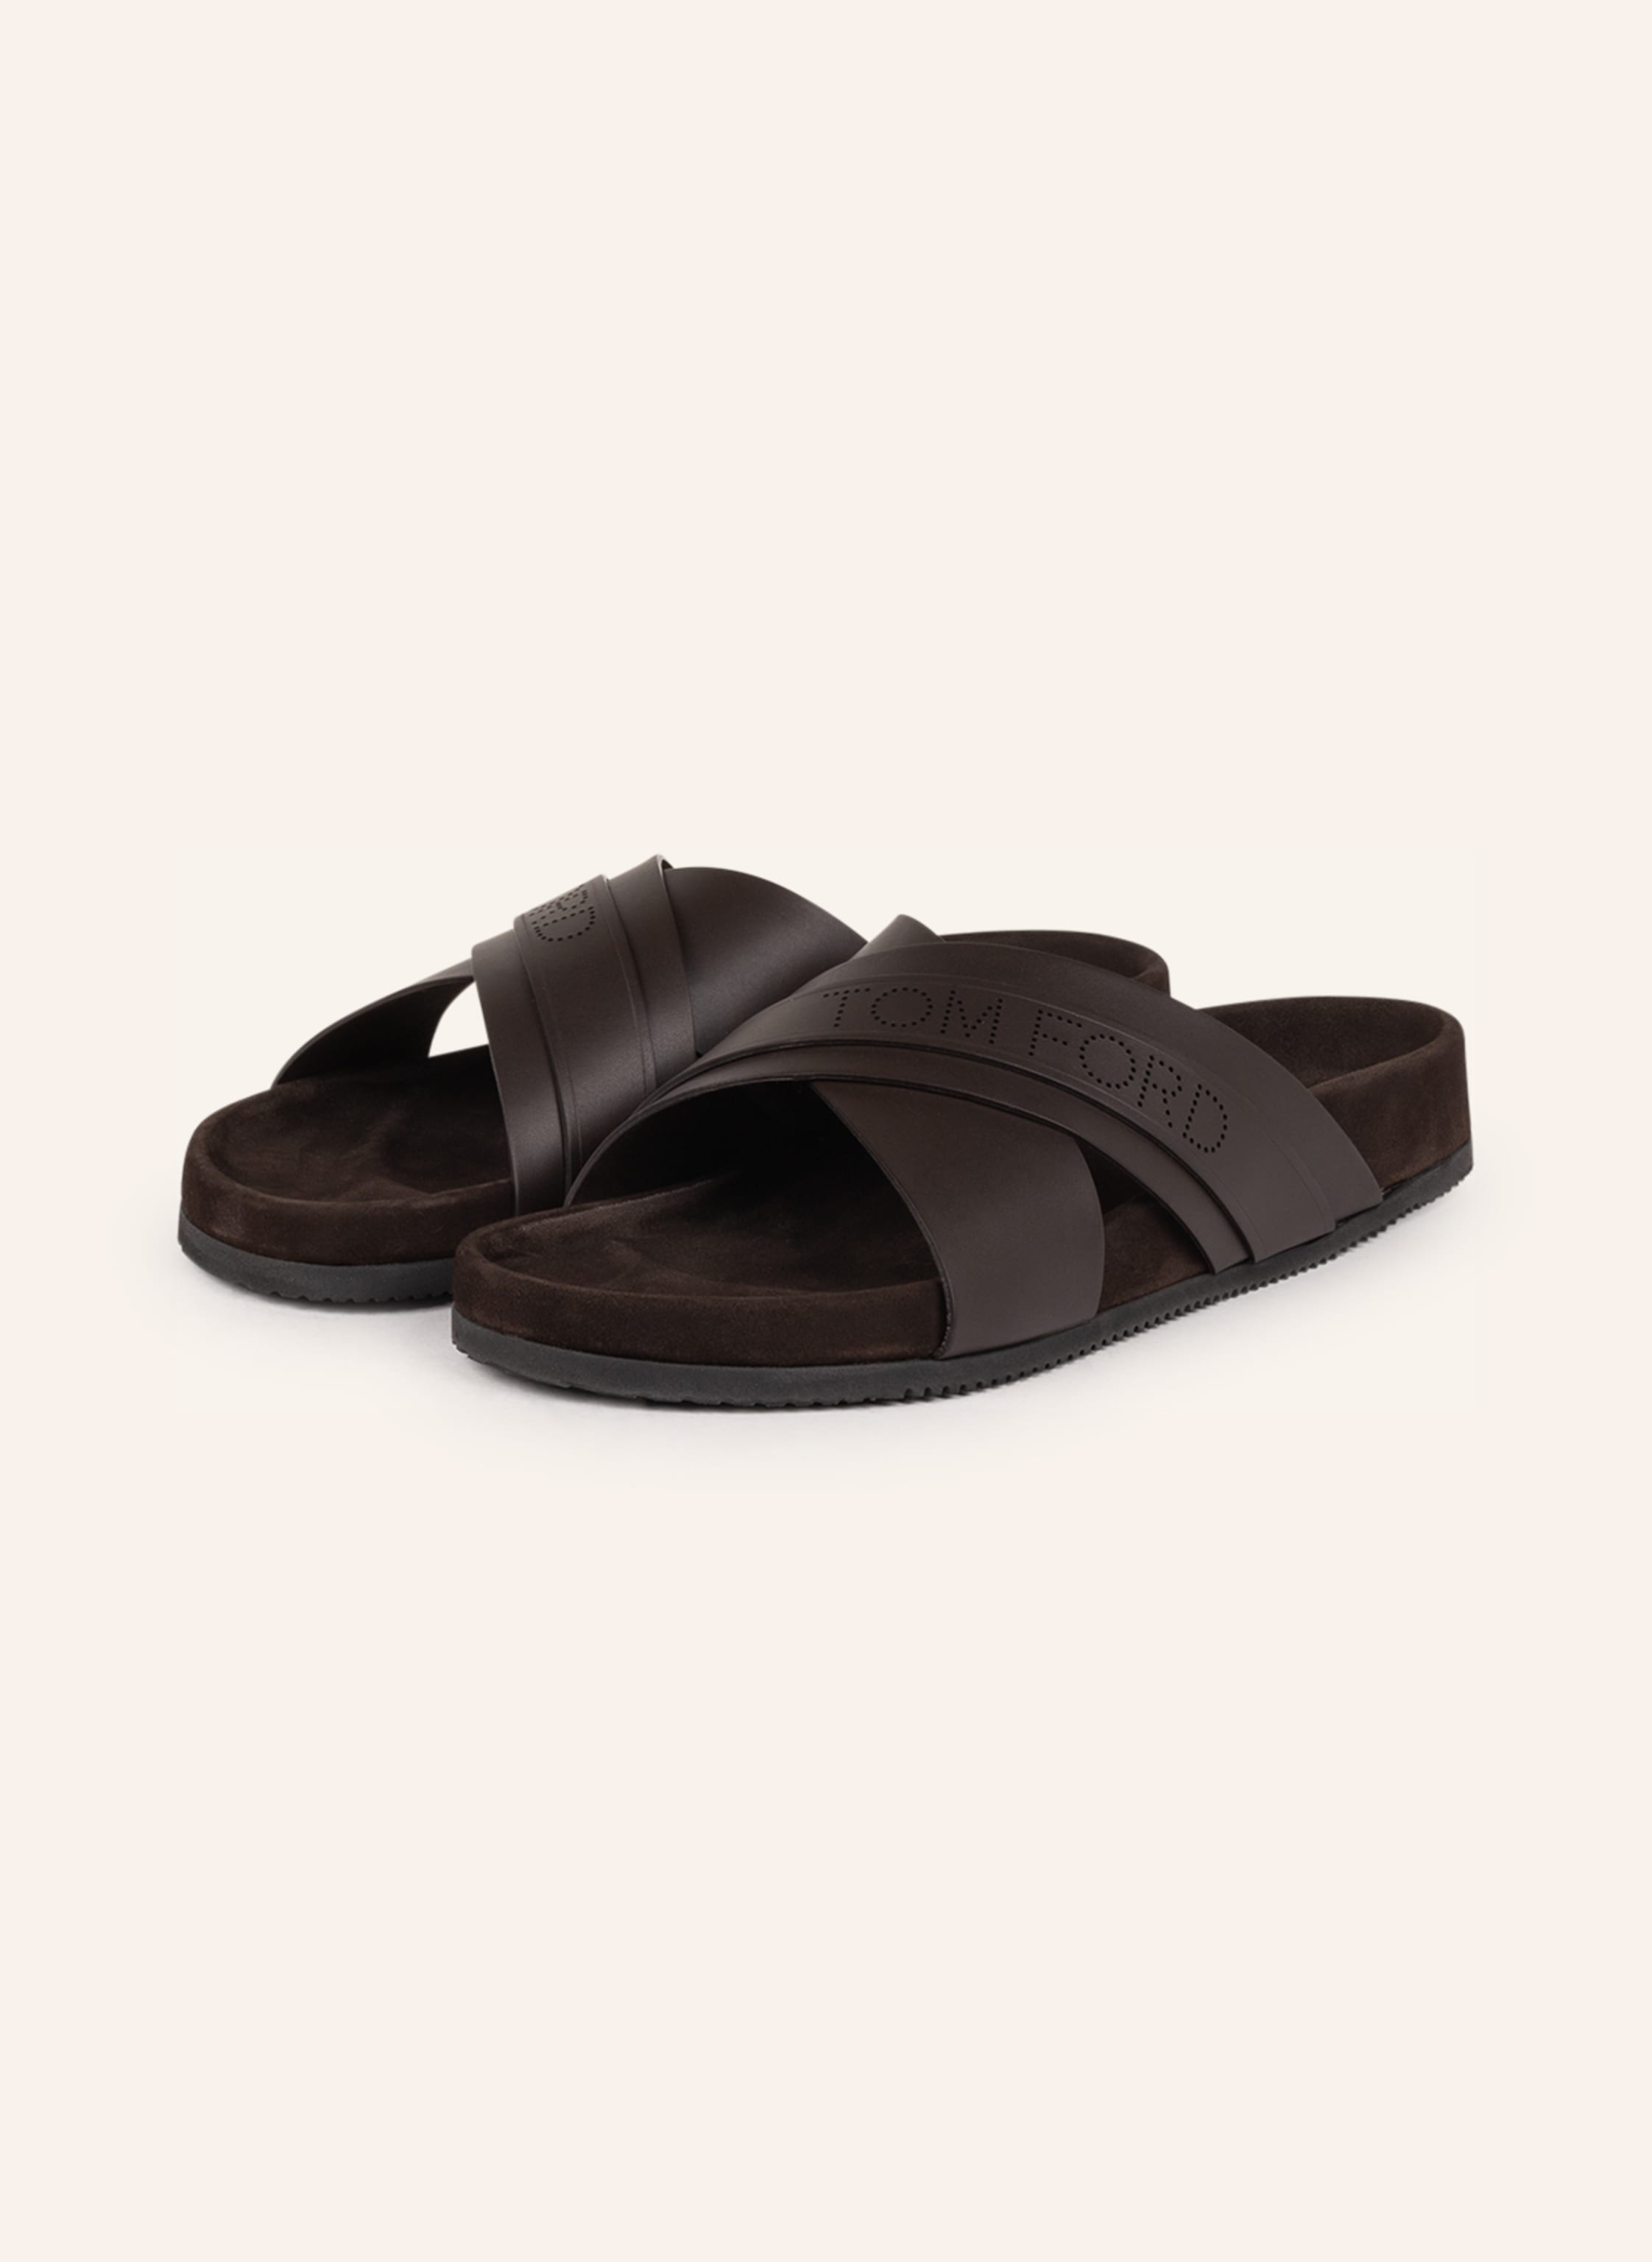 Tom Ford Mens Sandals in Chocolate slides and flip flops Sandals and flip-flops Mens Shoes Sandals for Men Save 45% Brown 